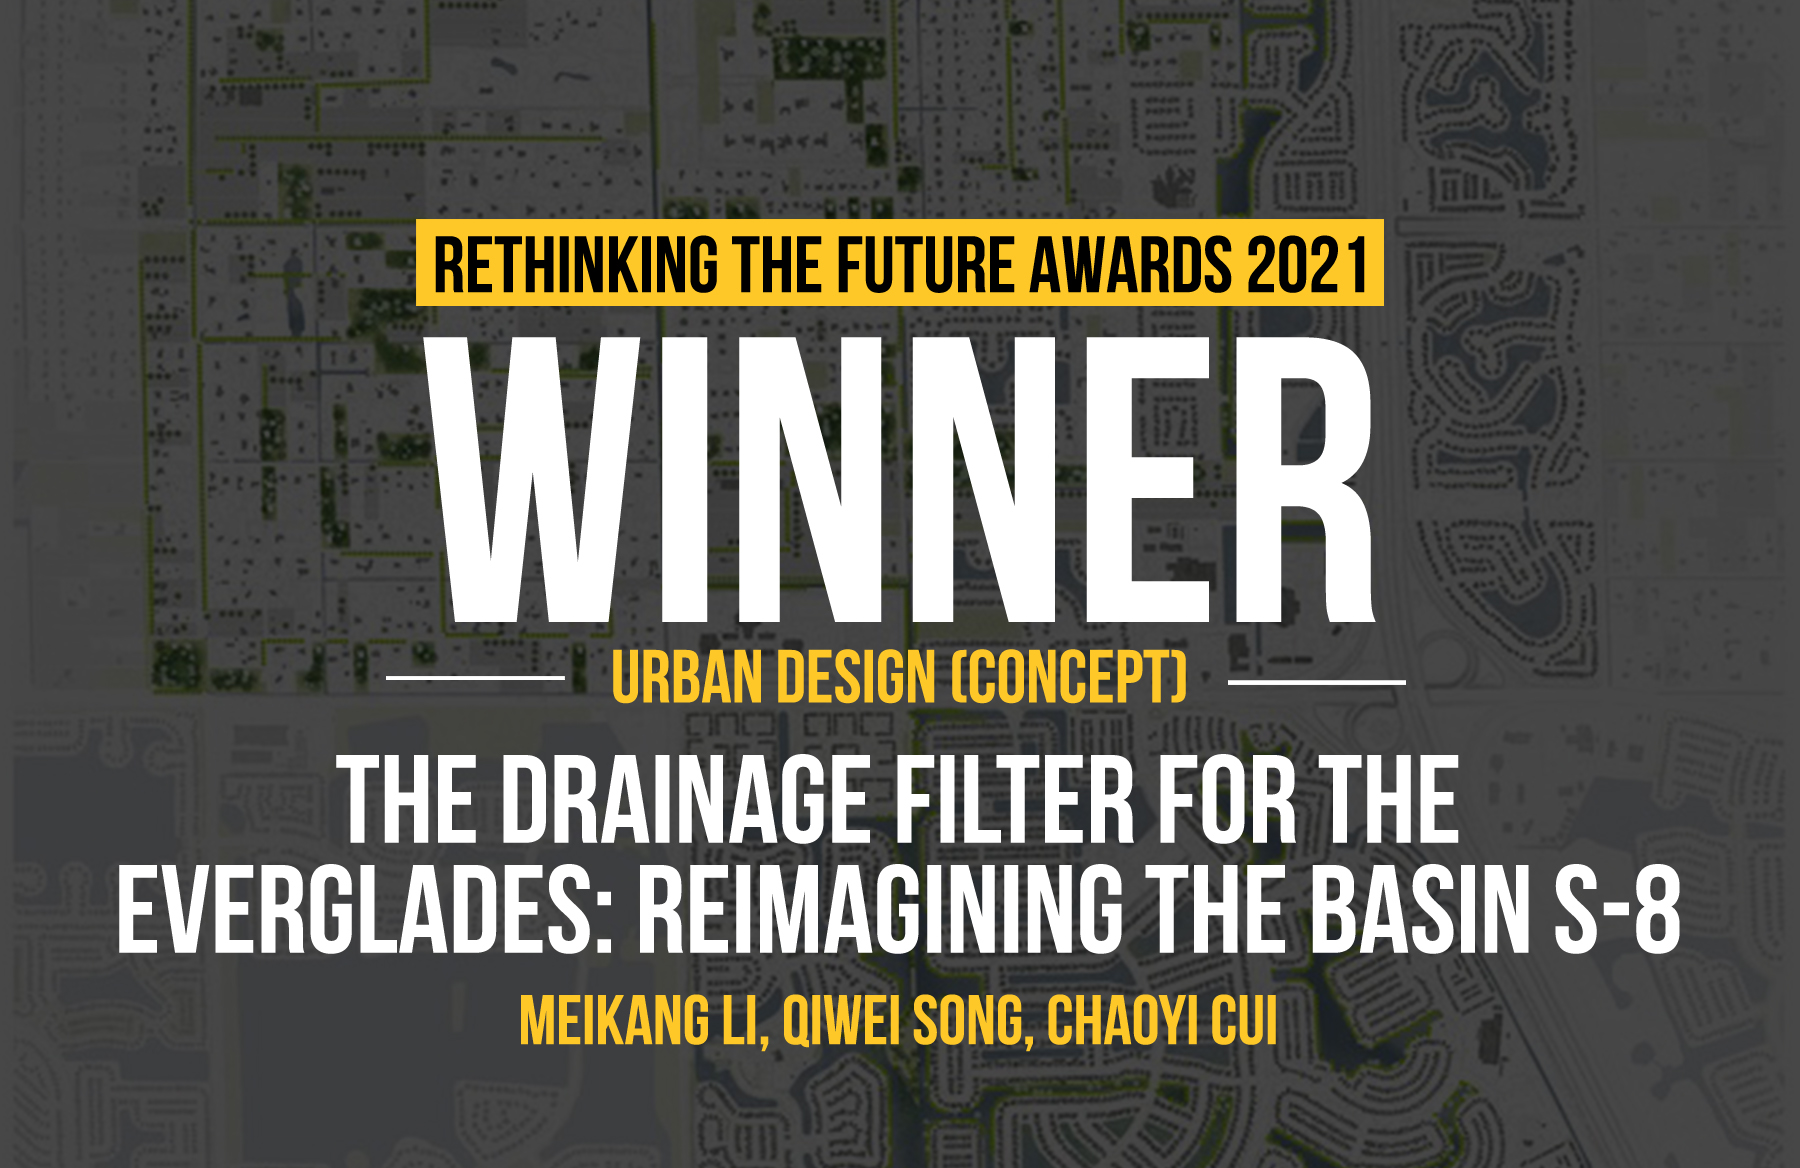 Architecture Awards - The Drainage Filter For The Everglades Reimagining The Basin S-8 - Design Awards